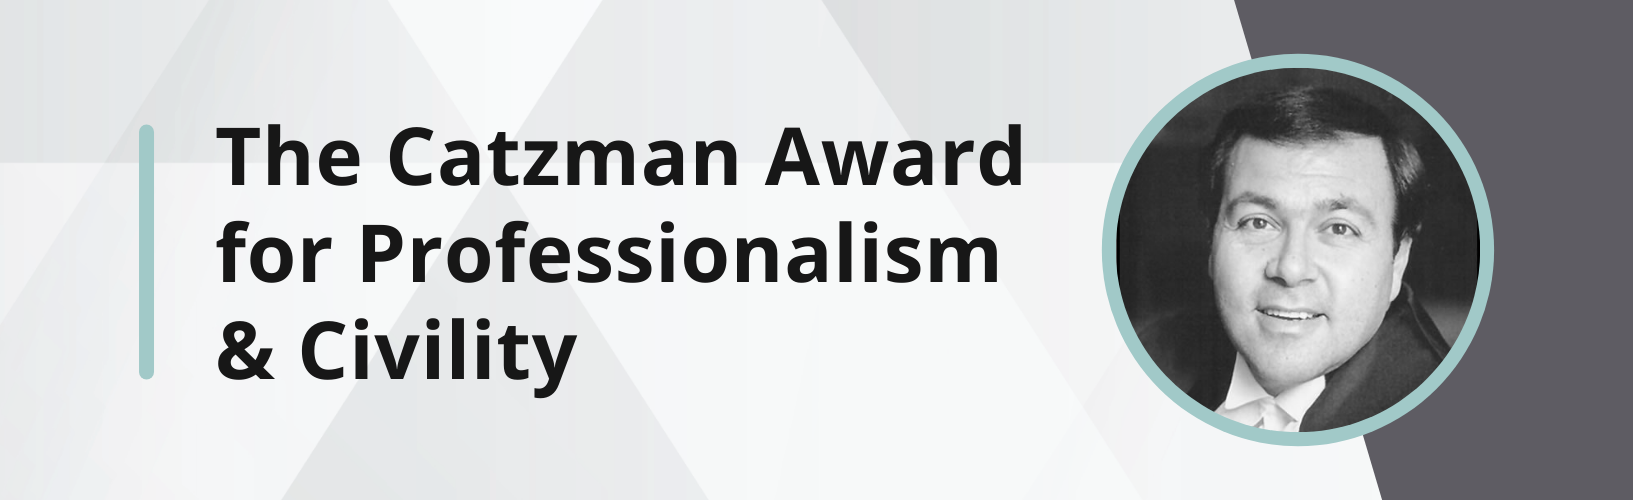 The Catzman Award for Professionalism and Civility